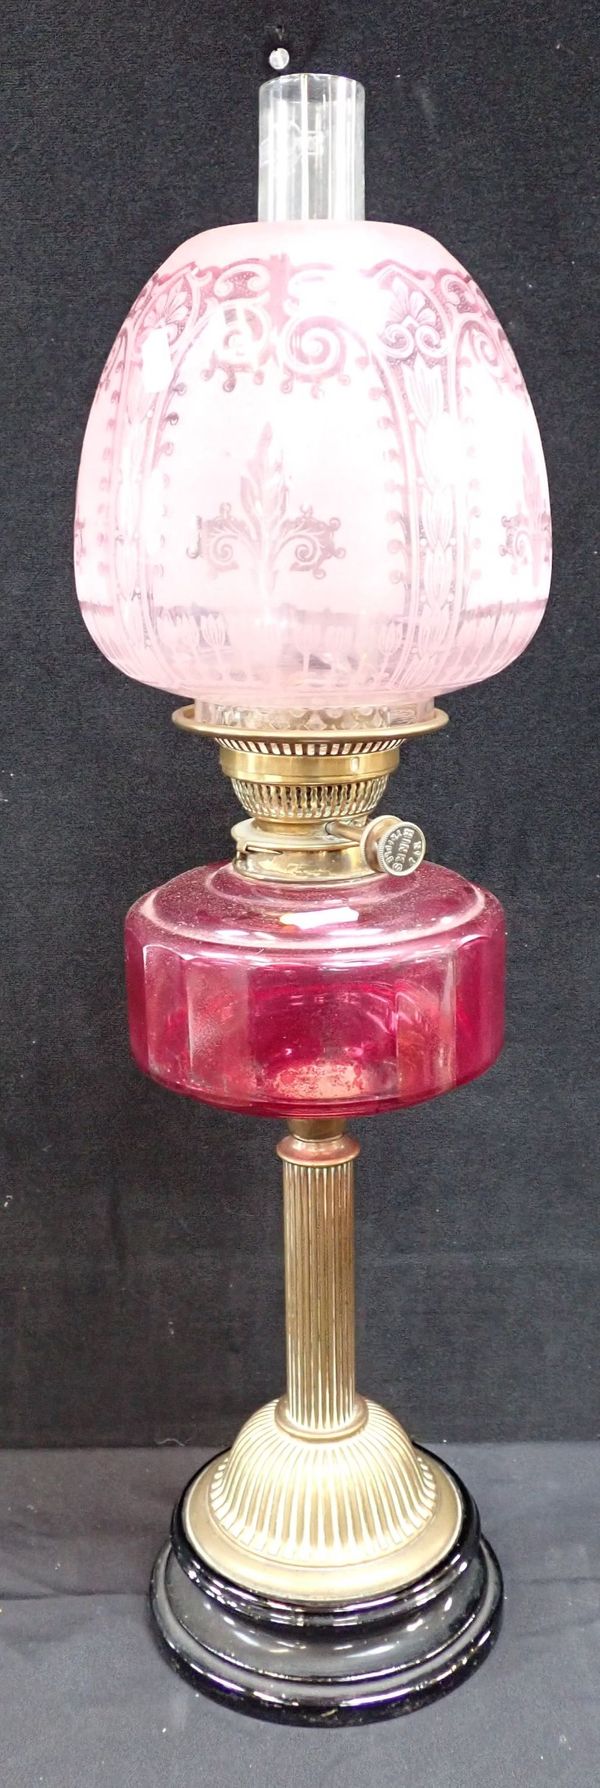 A 19TH CENTURY BRASS TABLE OIL LAMP WITH PNK GLASS RESERVOIR AND SHADE